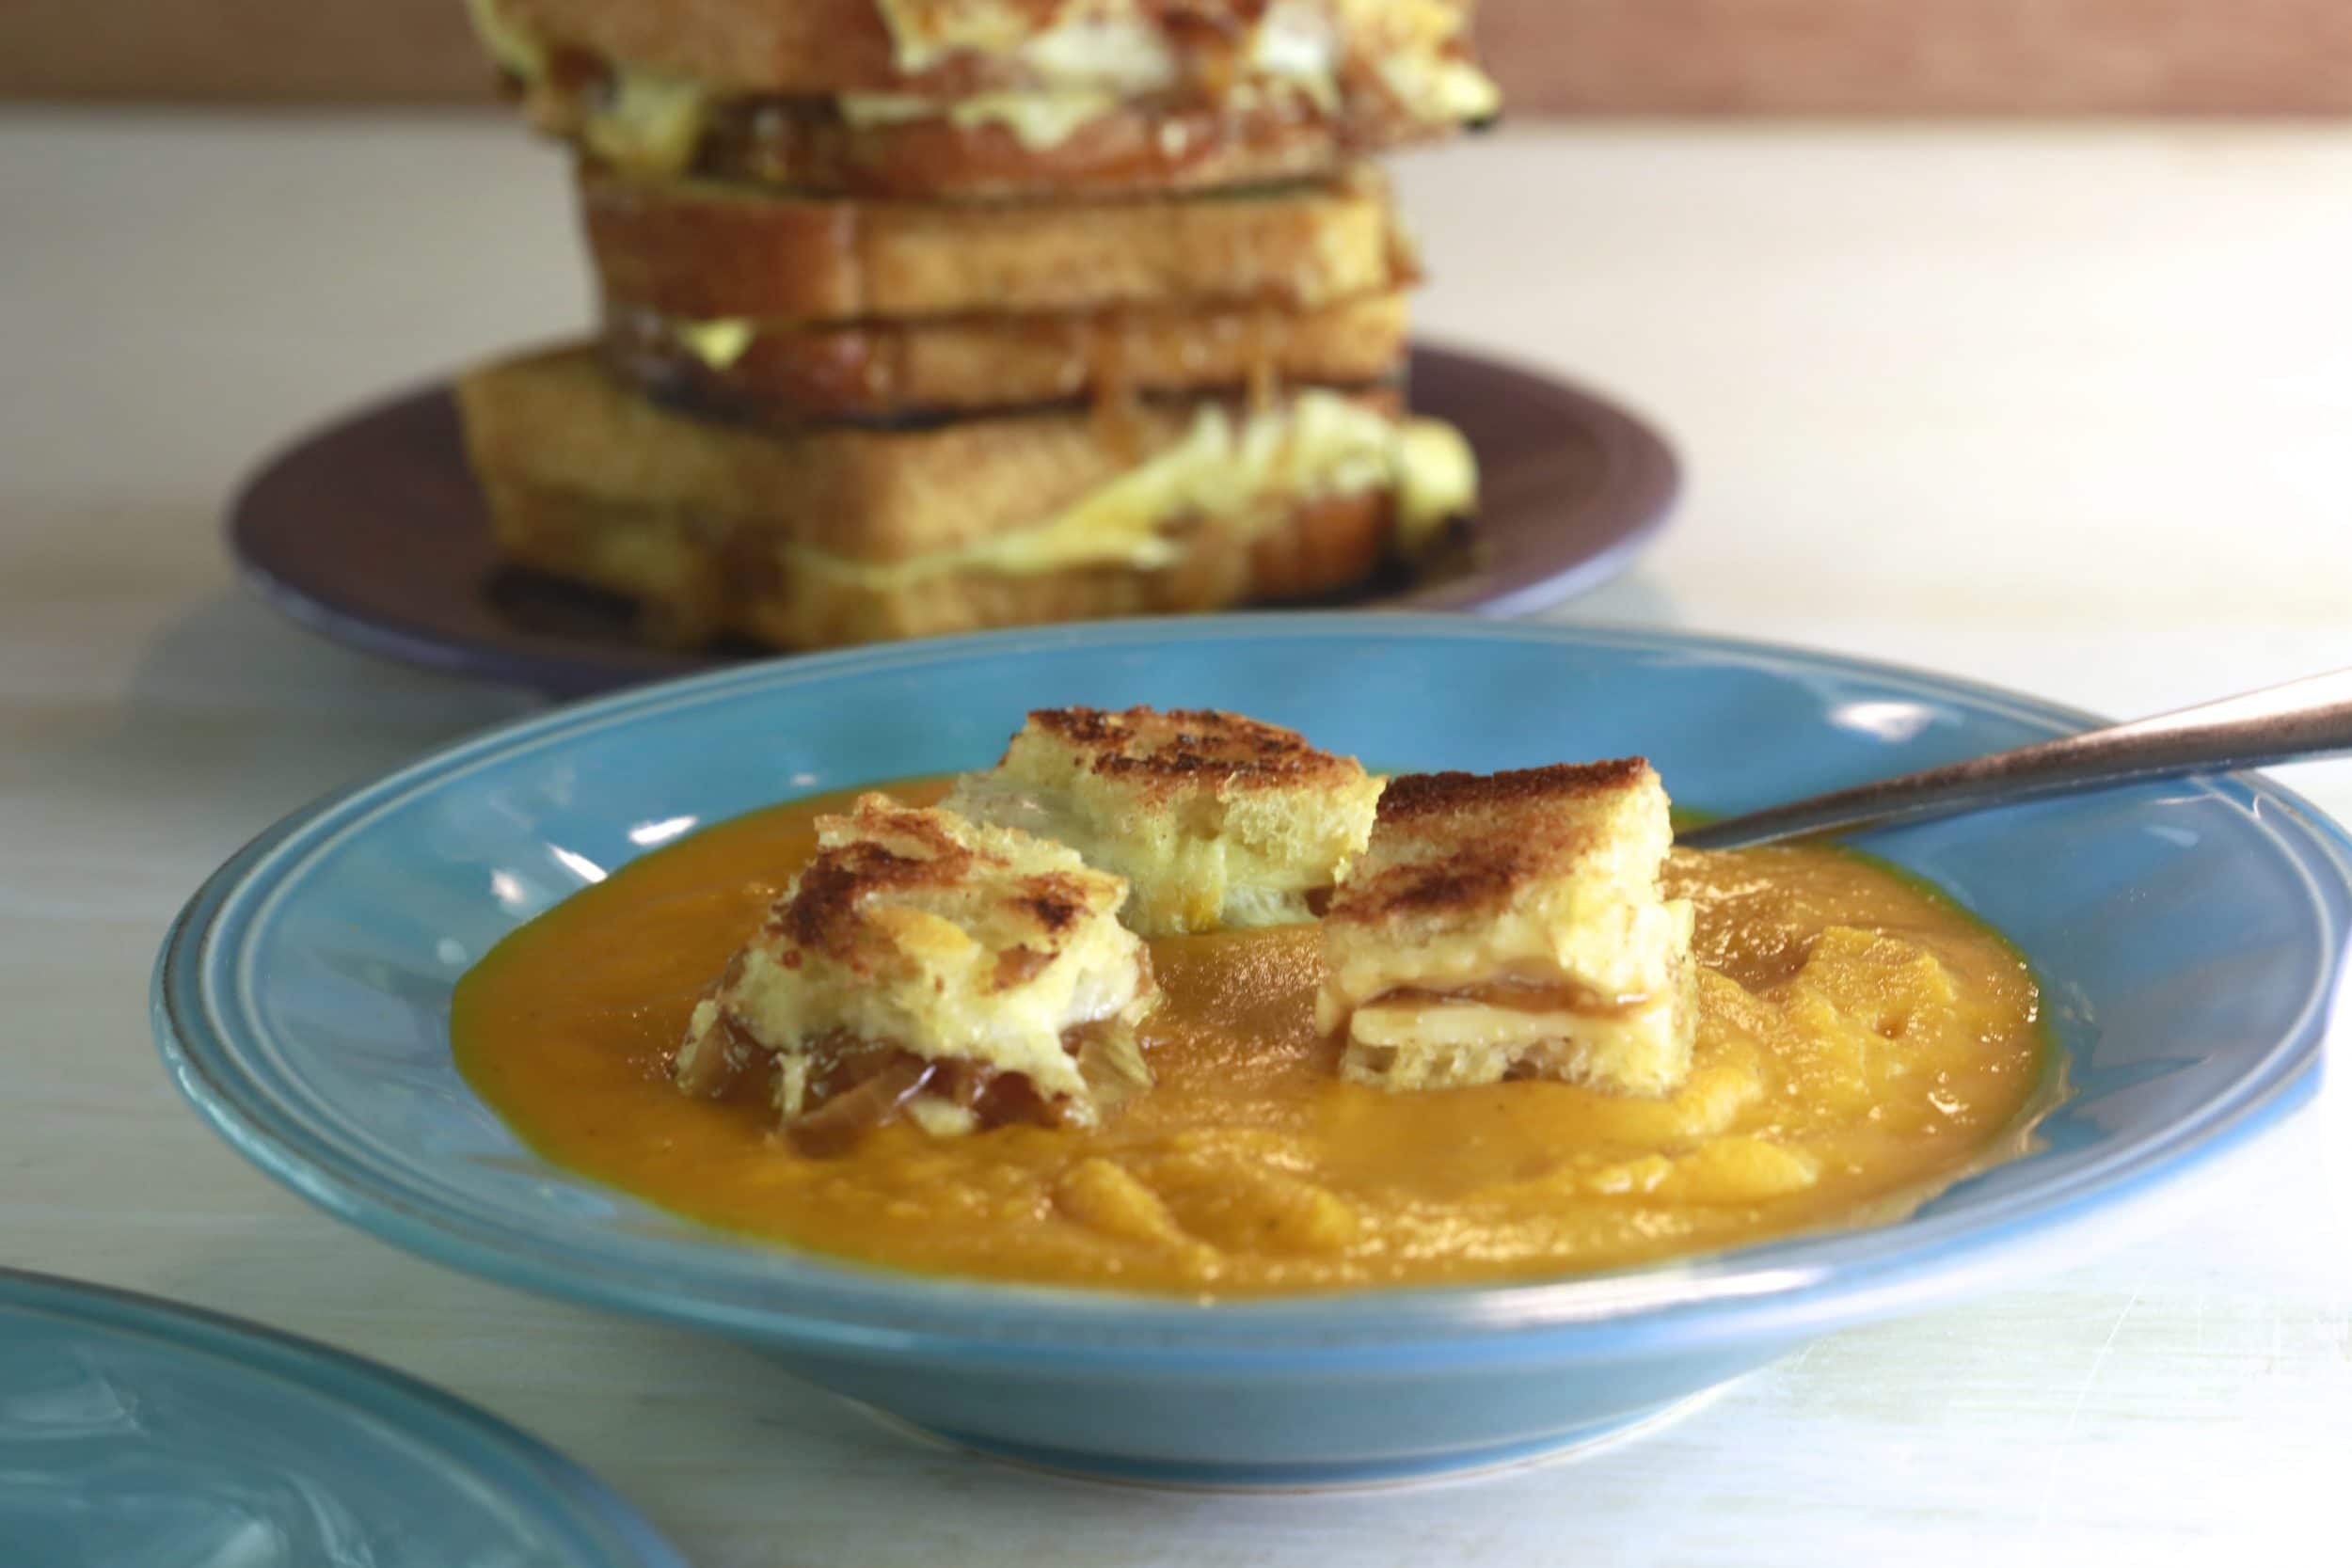 Roasted Vegetable and Tomato Soup with Grilled Cheese and Caramelized Onion Croutons